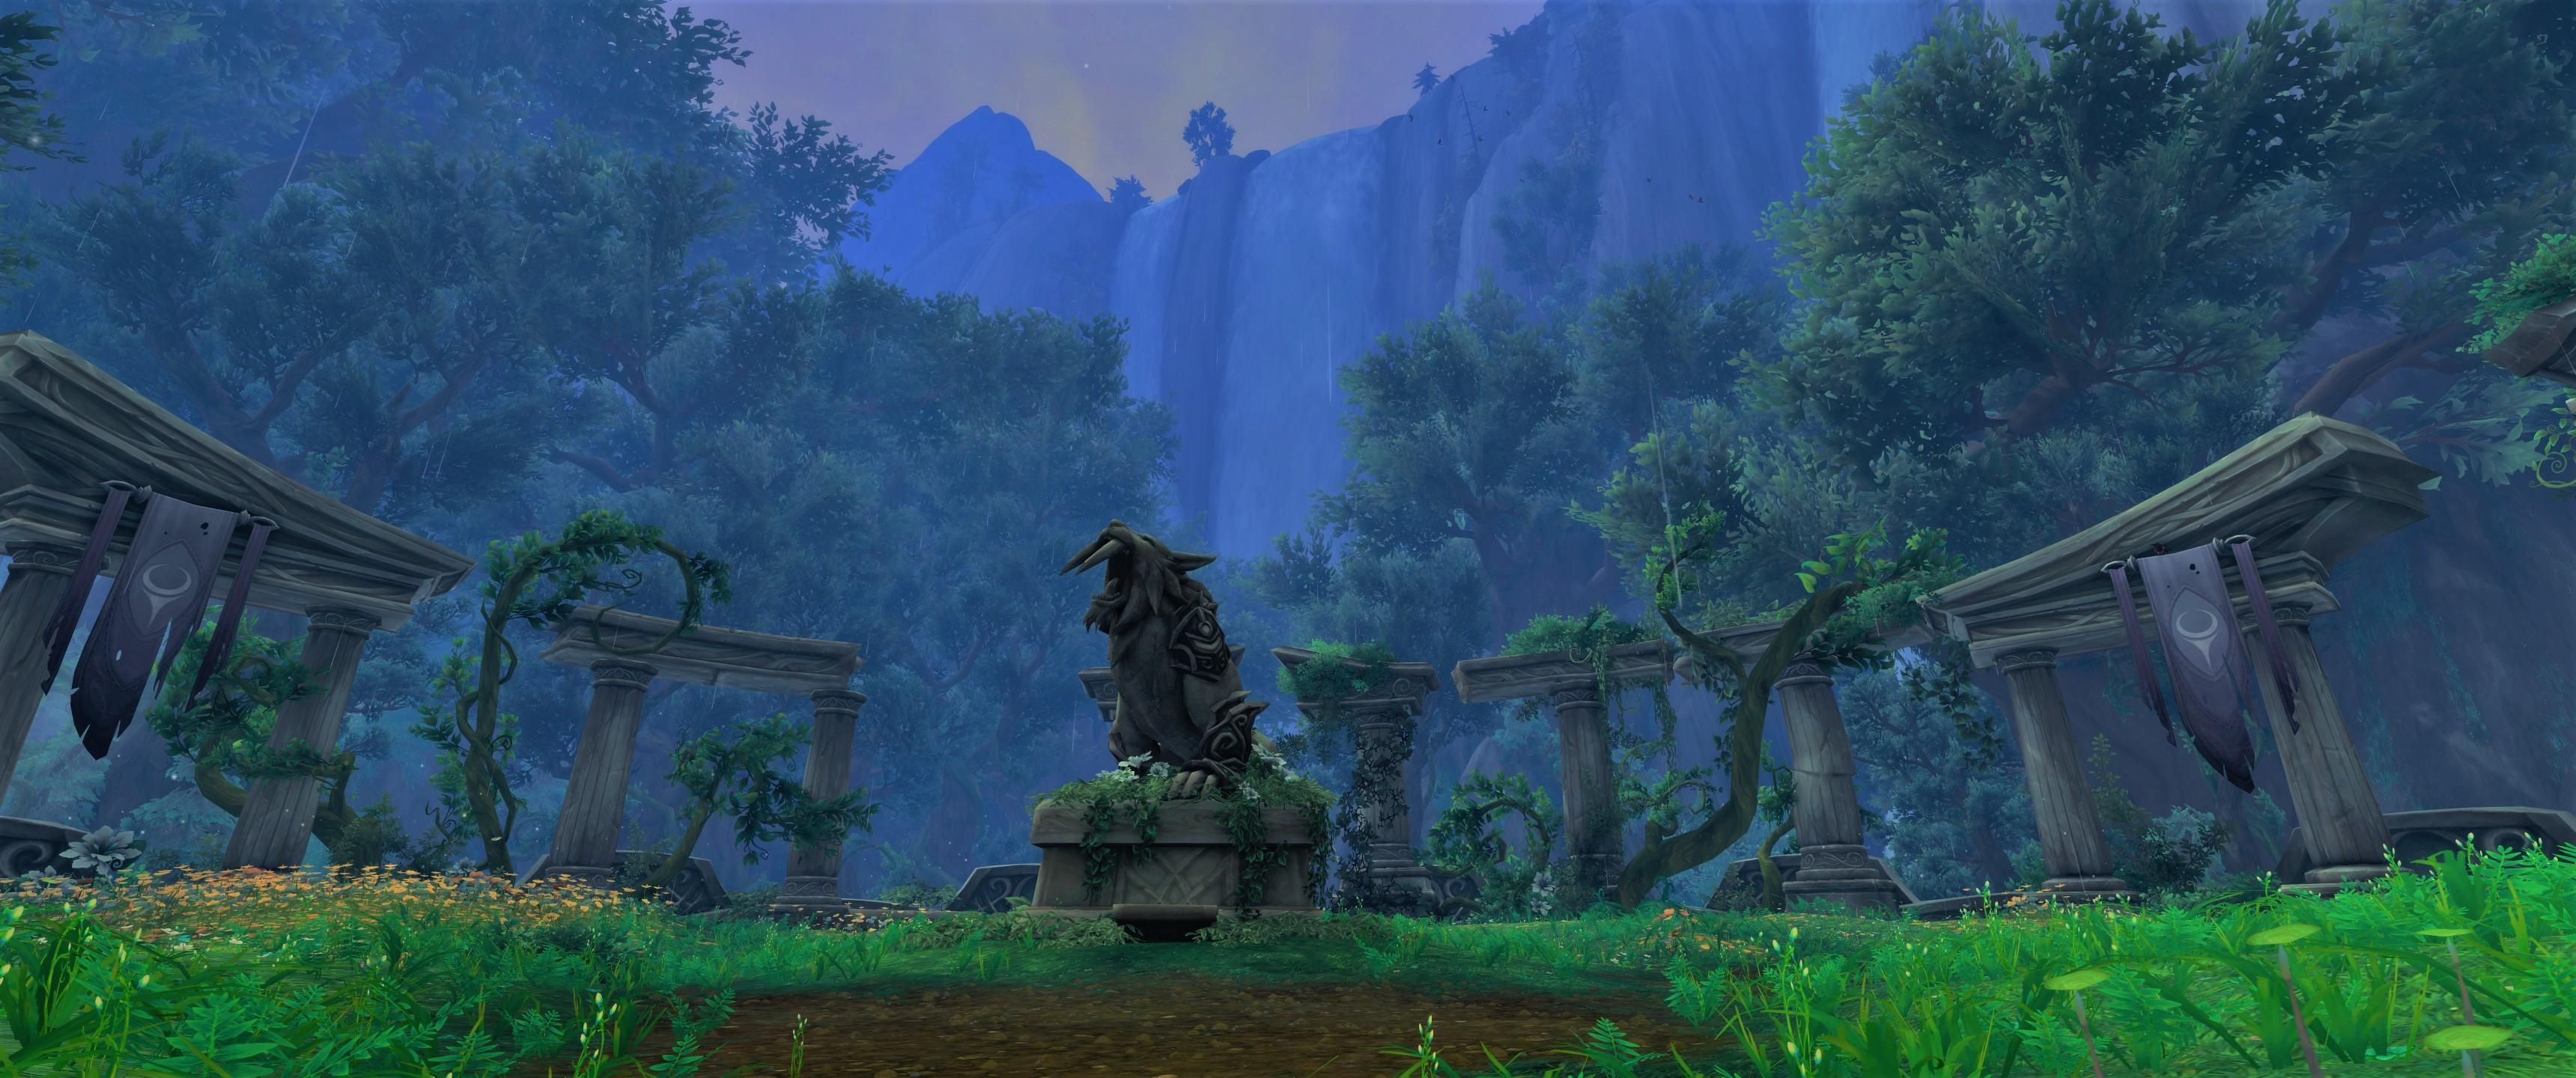 World Of Warcraft Landscape Wallpapers Top Free World Of Warcraft Landscape Backgrounds